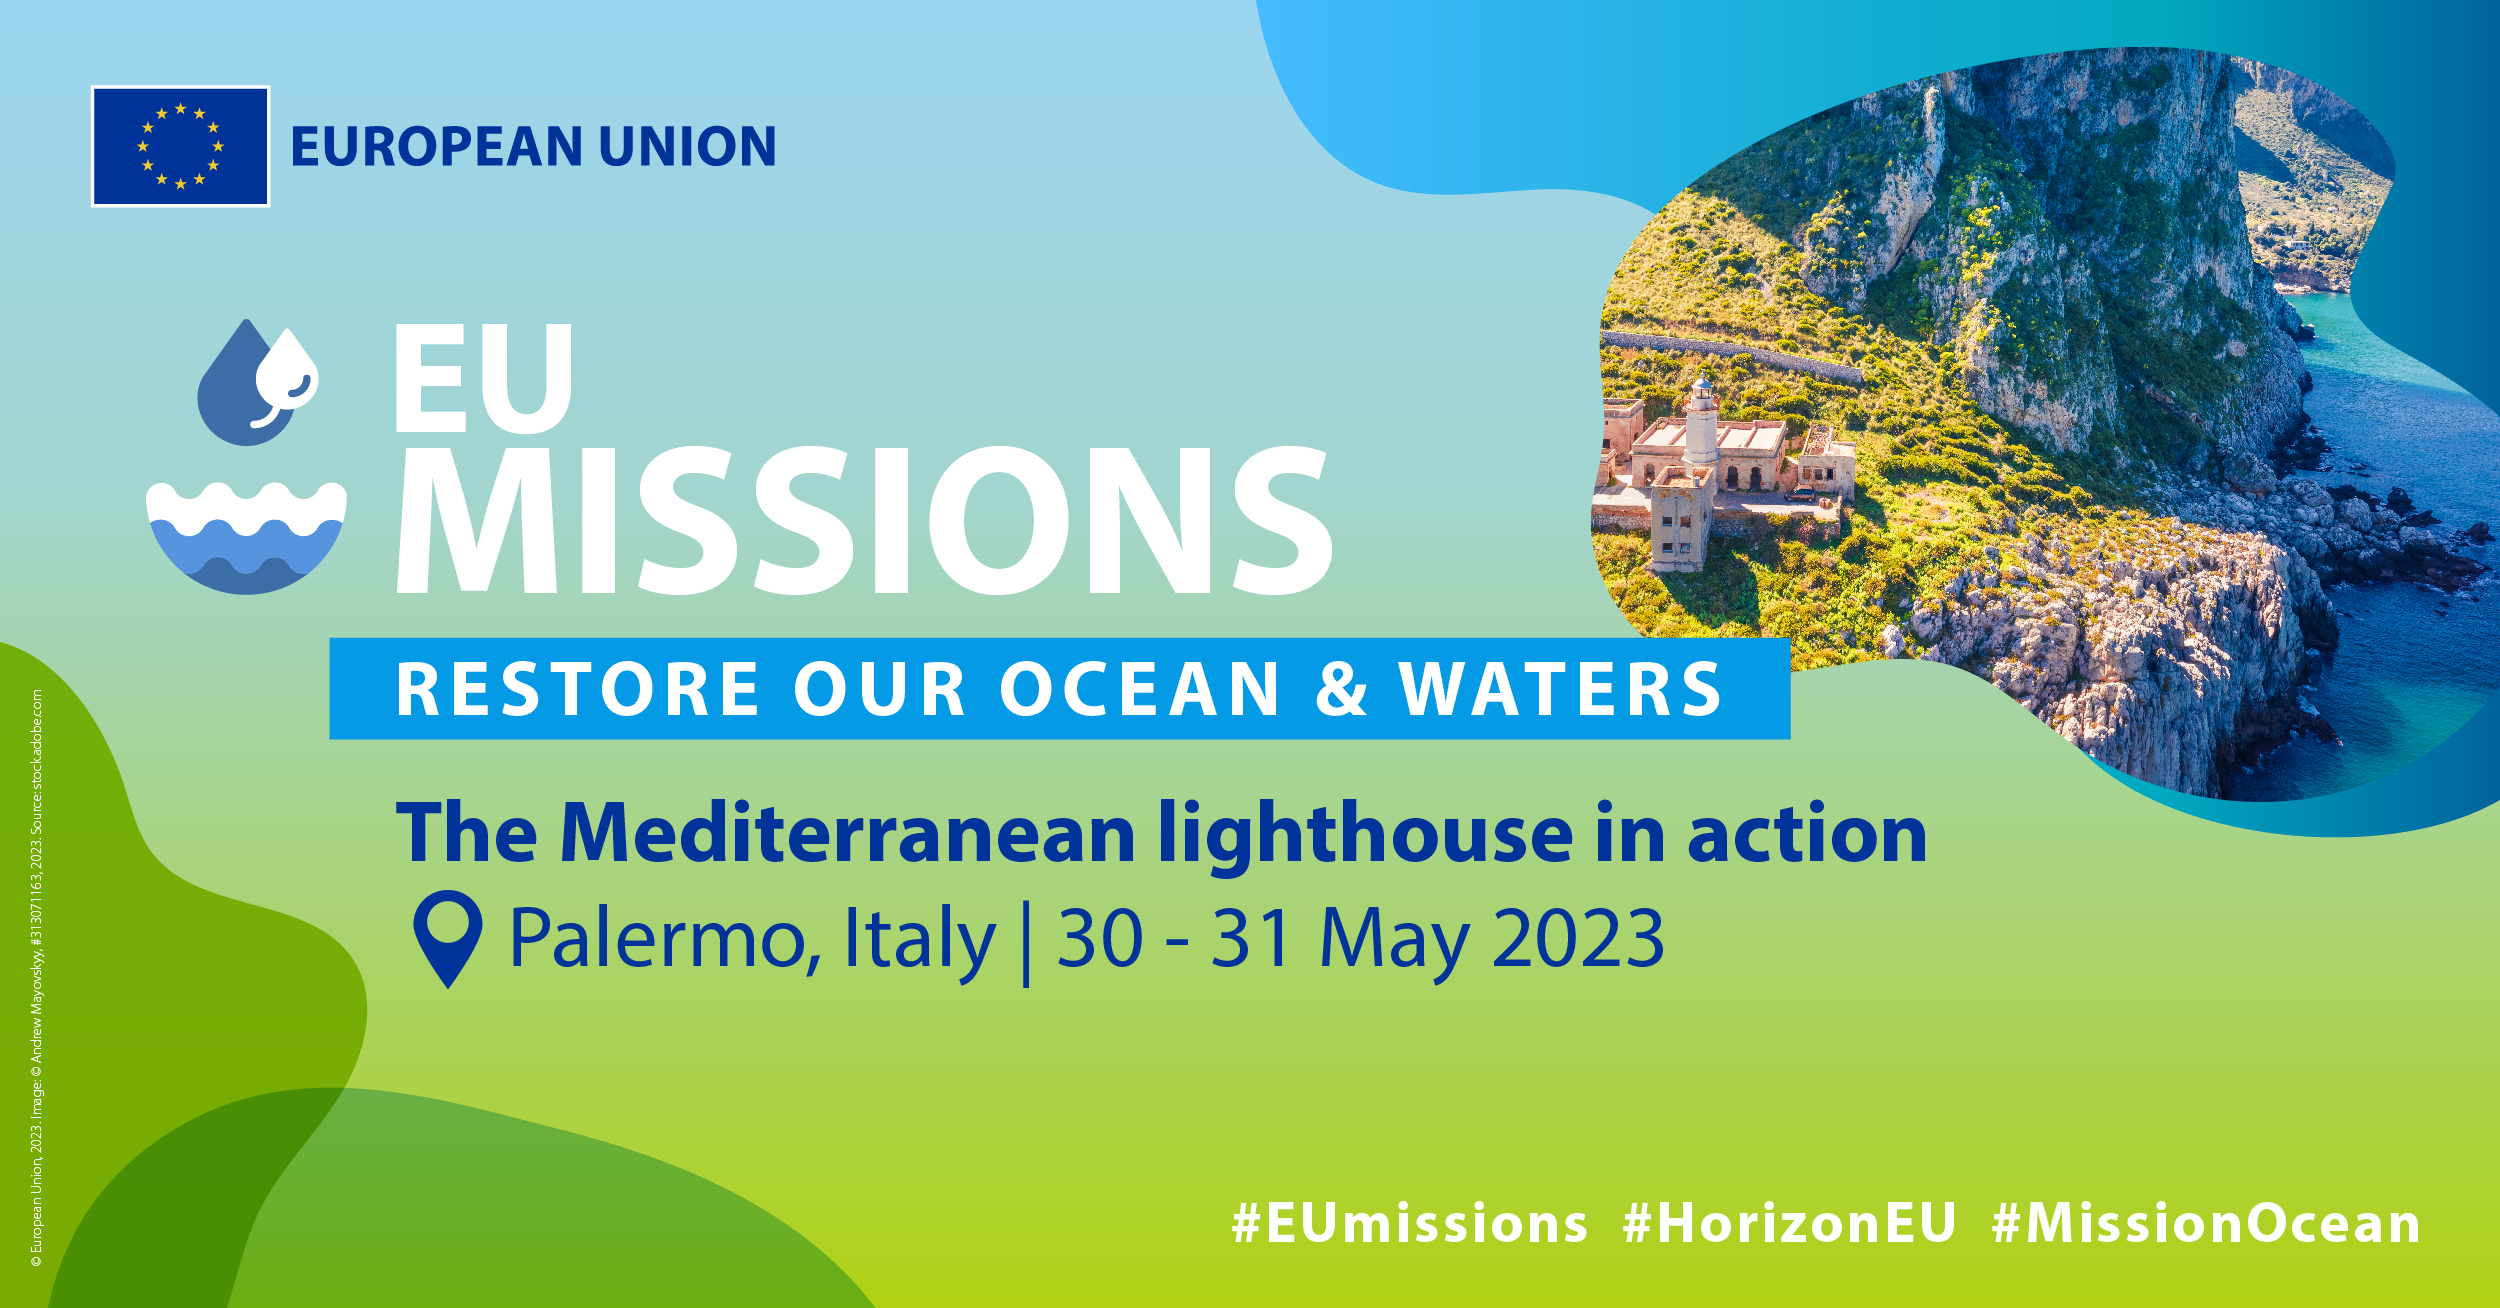 GENOVA PROTAGONISTA ALLA MISSIONE EUROPEA “RESTORE OUR OCEAN AND WATERS BY 2030” 